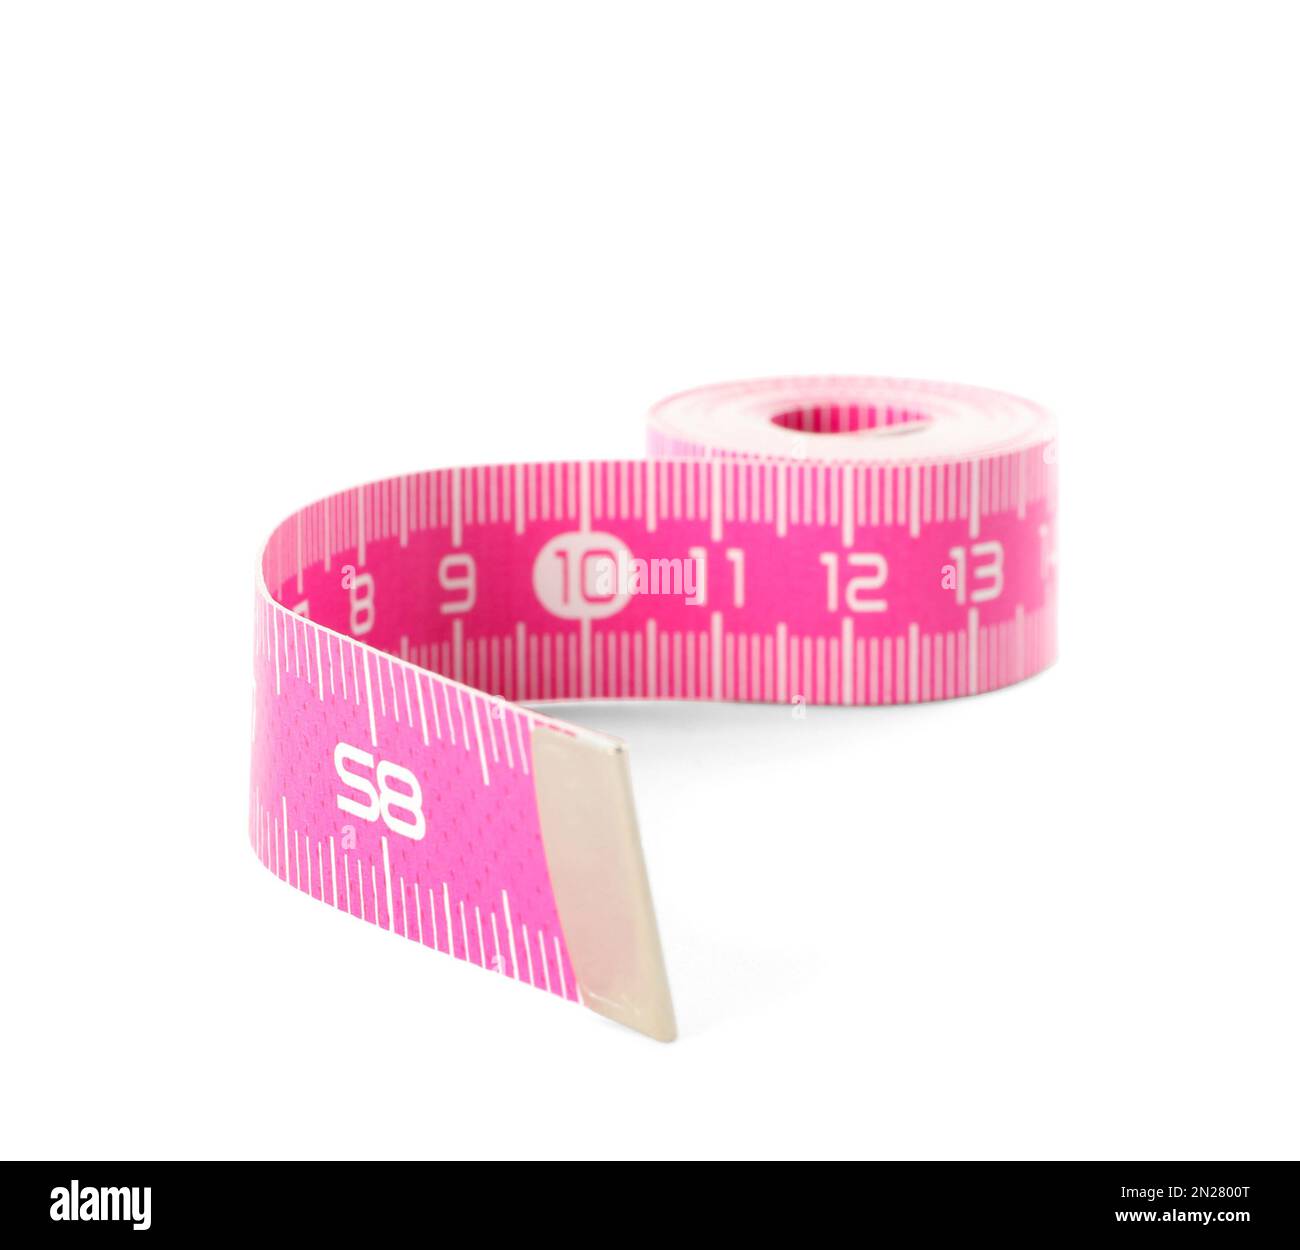 Close Up Pink Measuring Tape On White Background Stock Photo, Picture and  Royalty Free Image. Image 86213359.